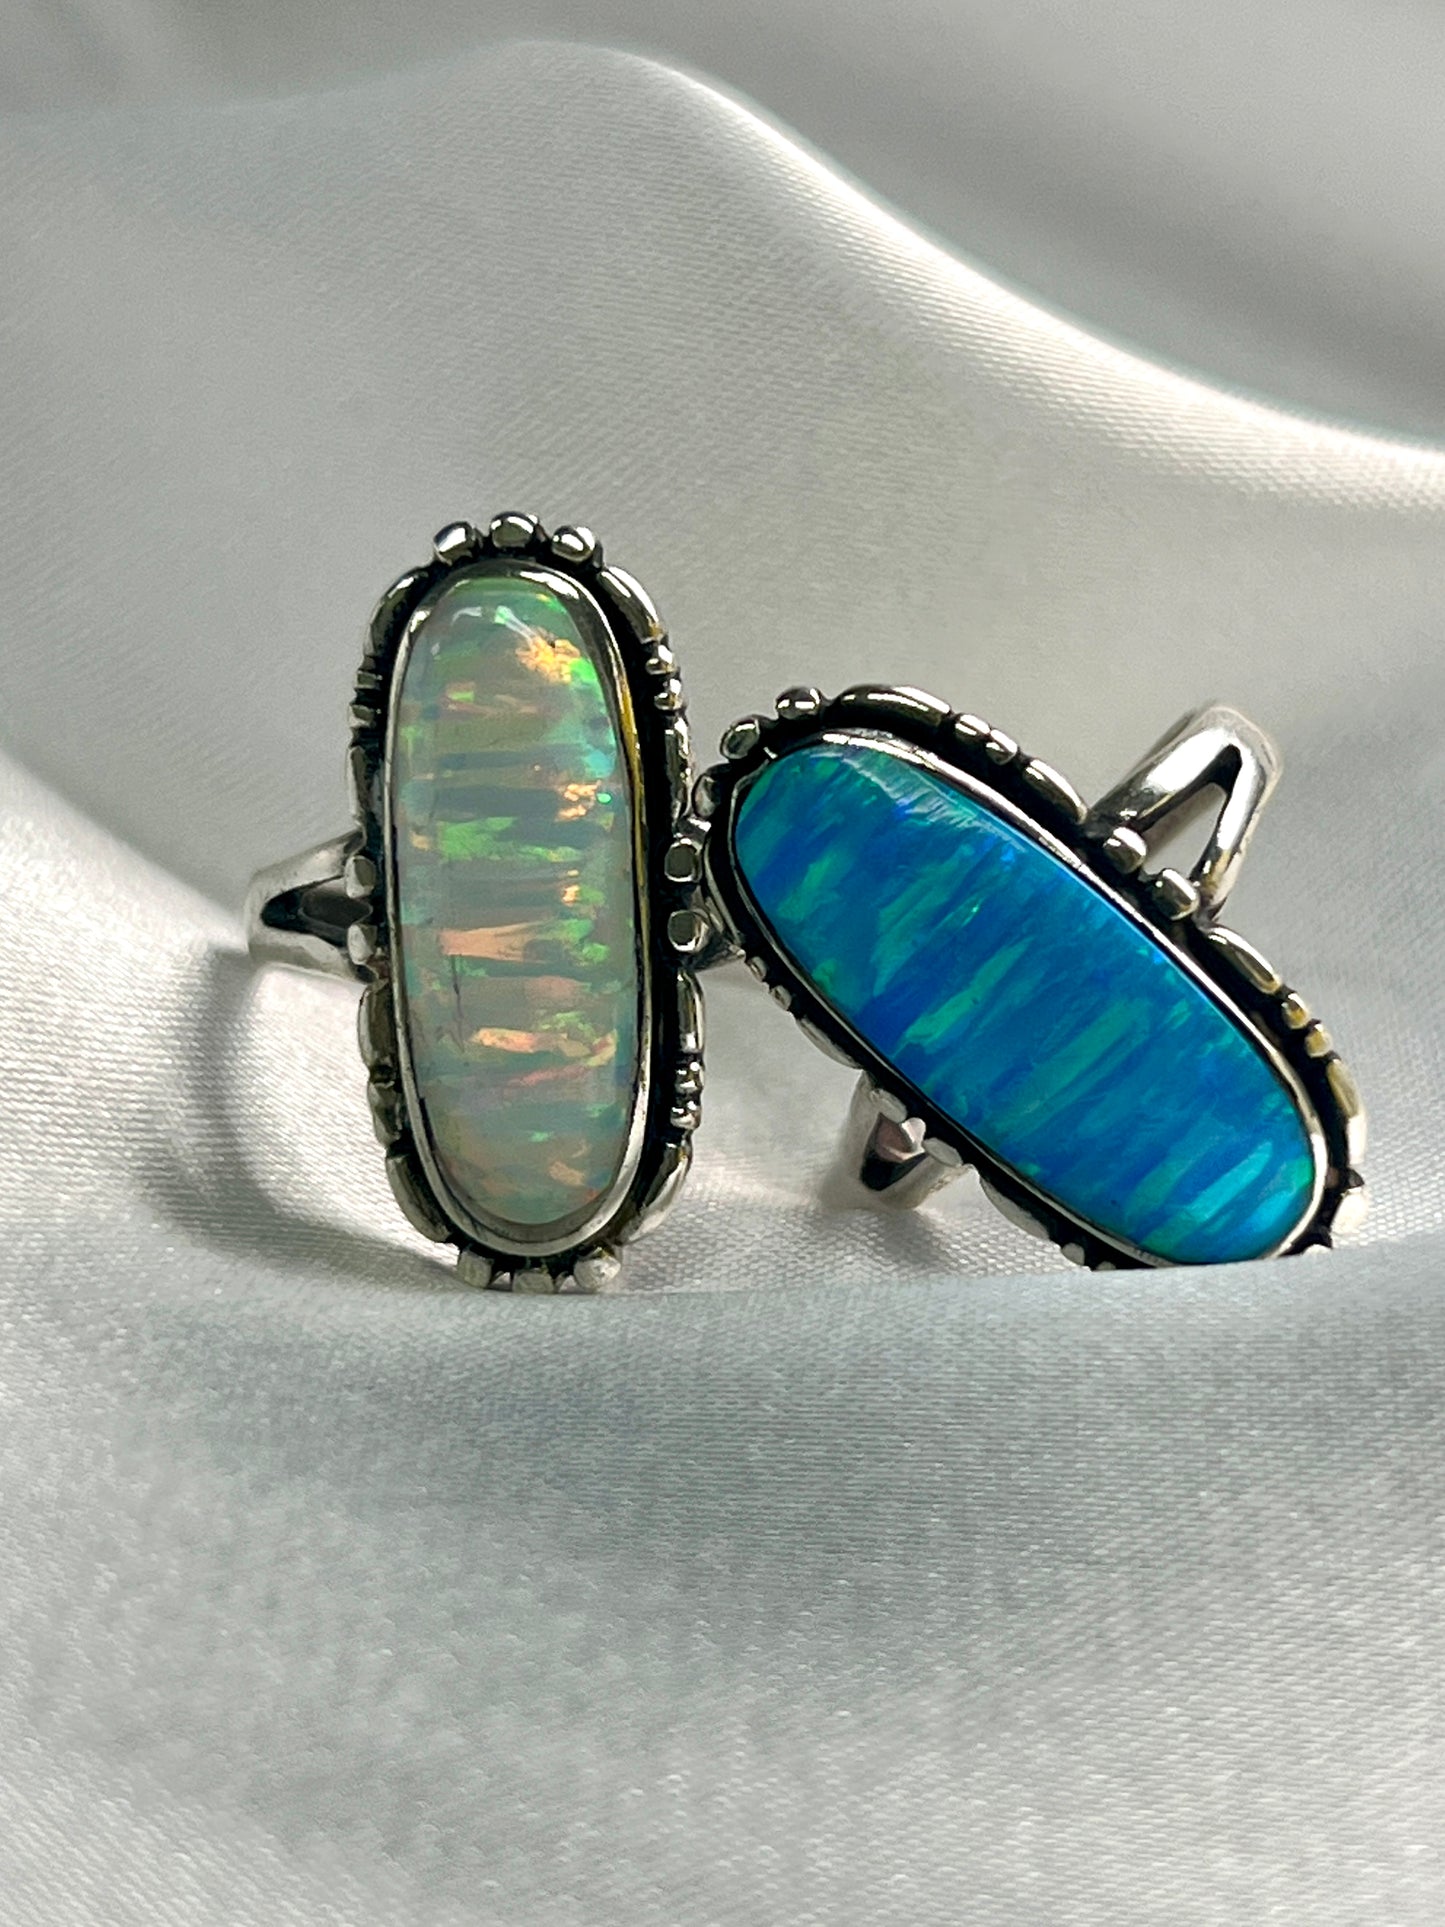 Super Silver's American Made Oval Opal Ring with a southwestern-styled design, resting on a white cloth.